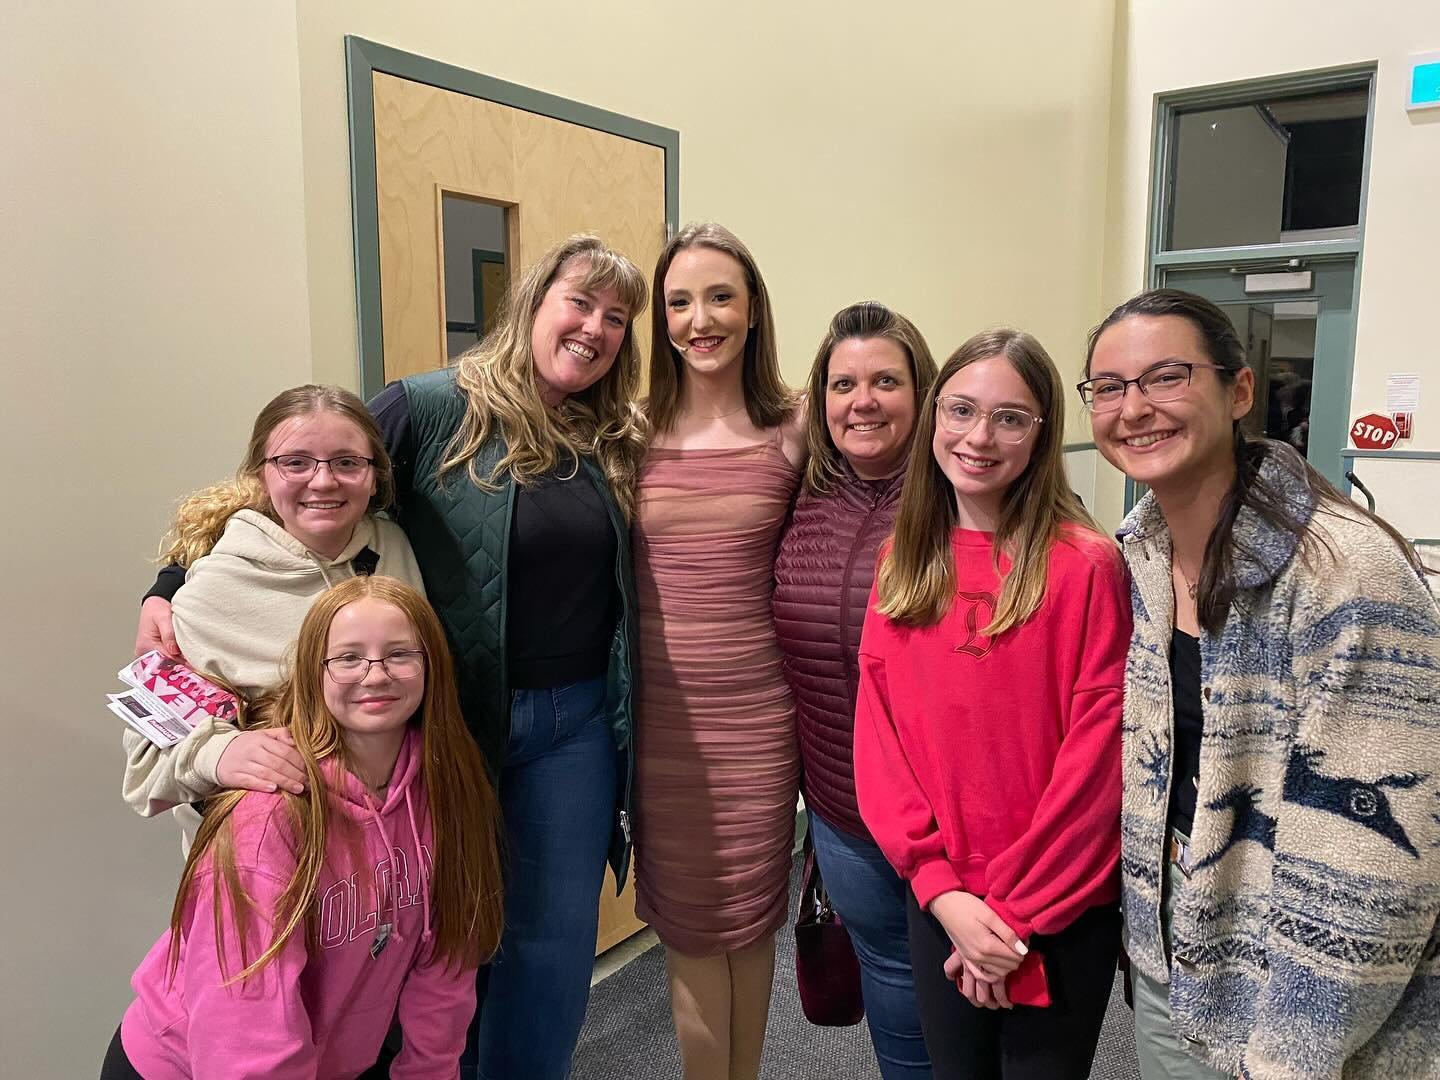 So proud of @briarfagan for her performance and #madchoreographyskills for @meangirlsmusical @selkirkperformingarts !!! Briar you were a bright star tonight!!! Go get your tickets for @meangirls, 1 more night!